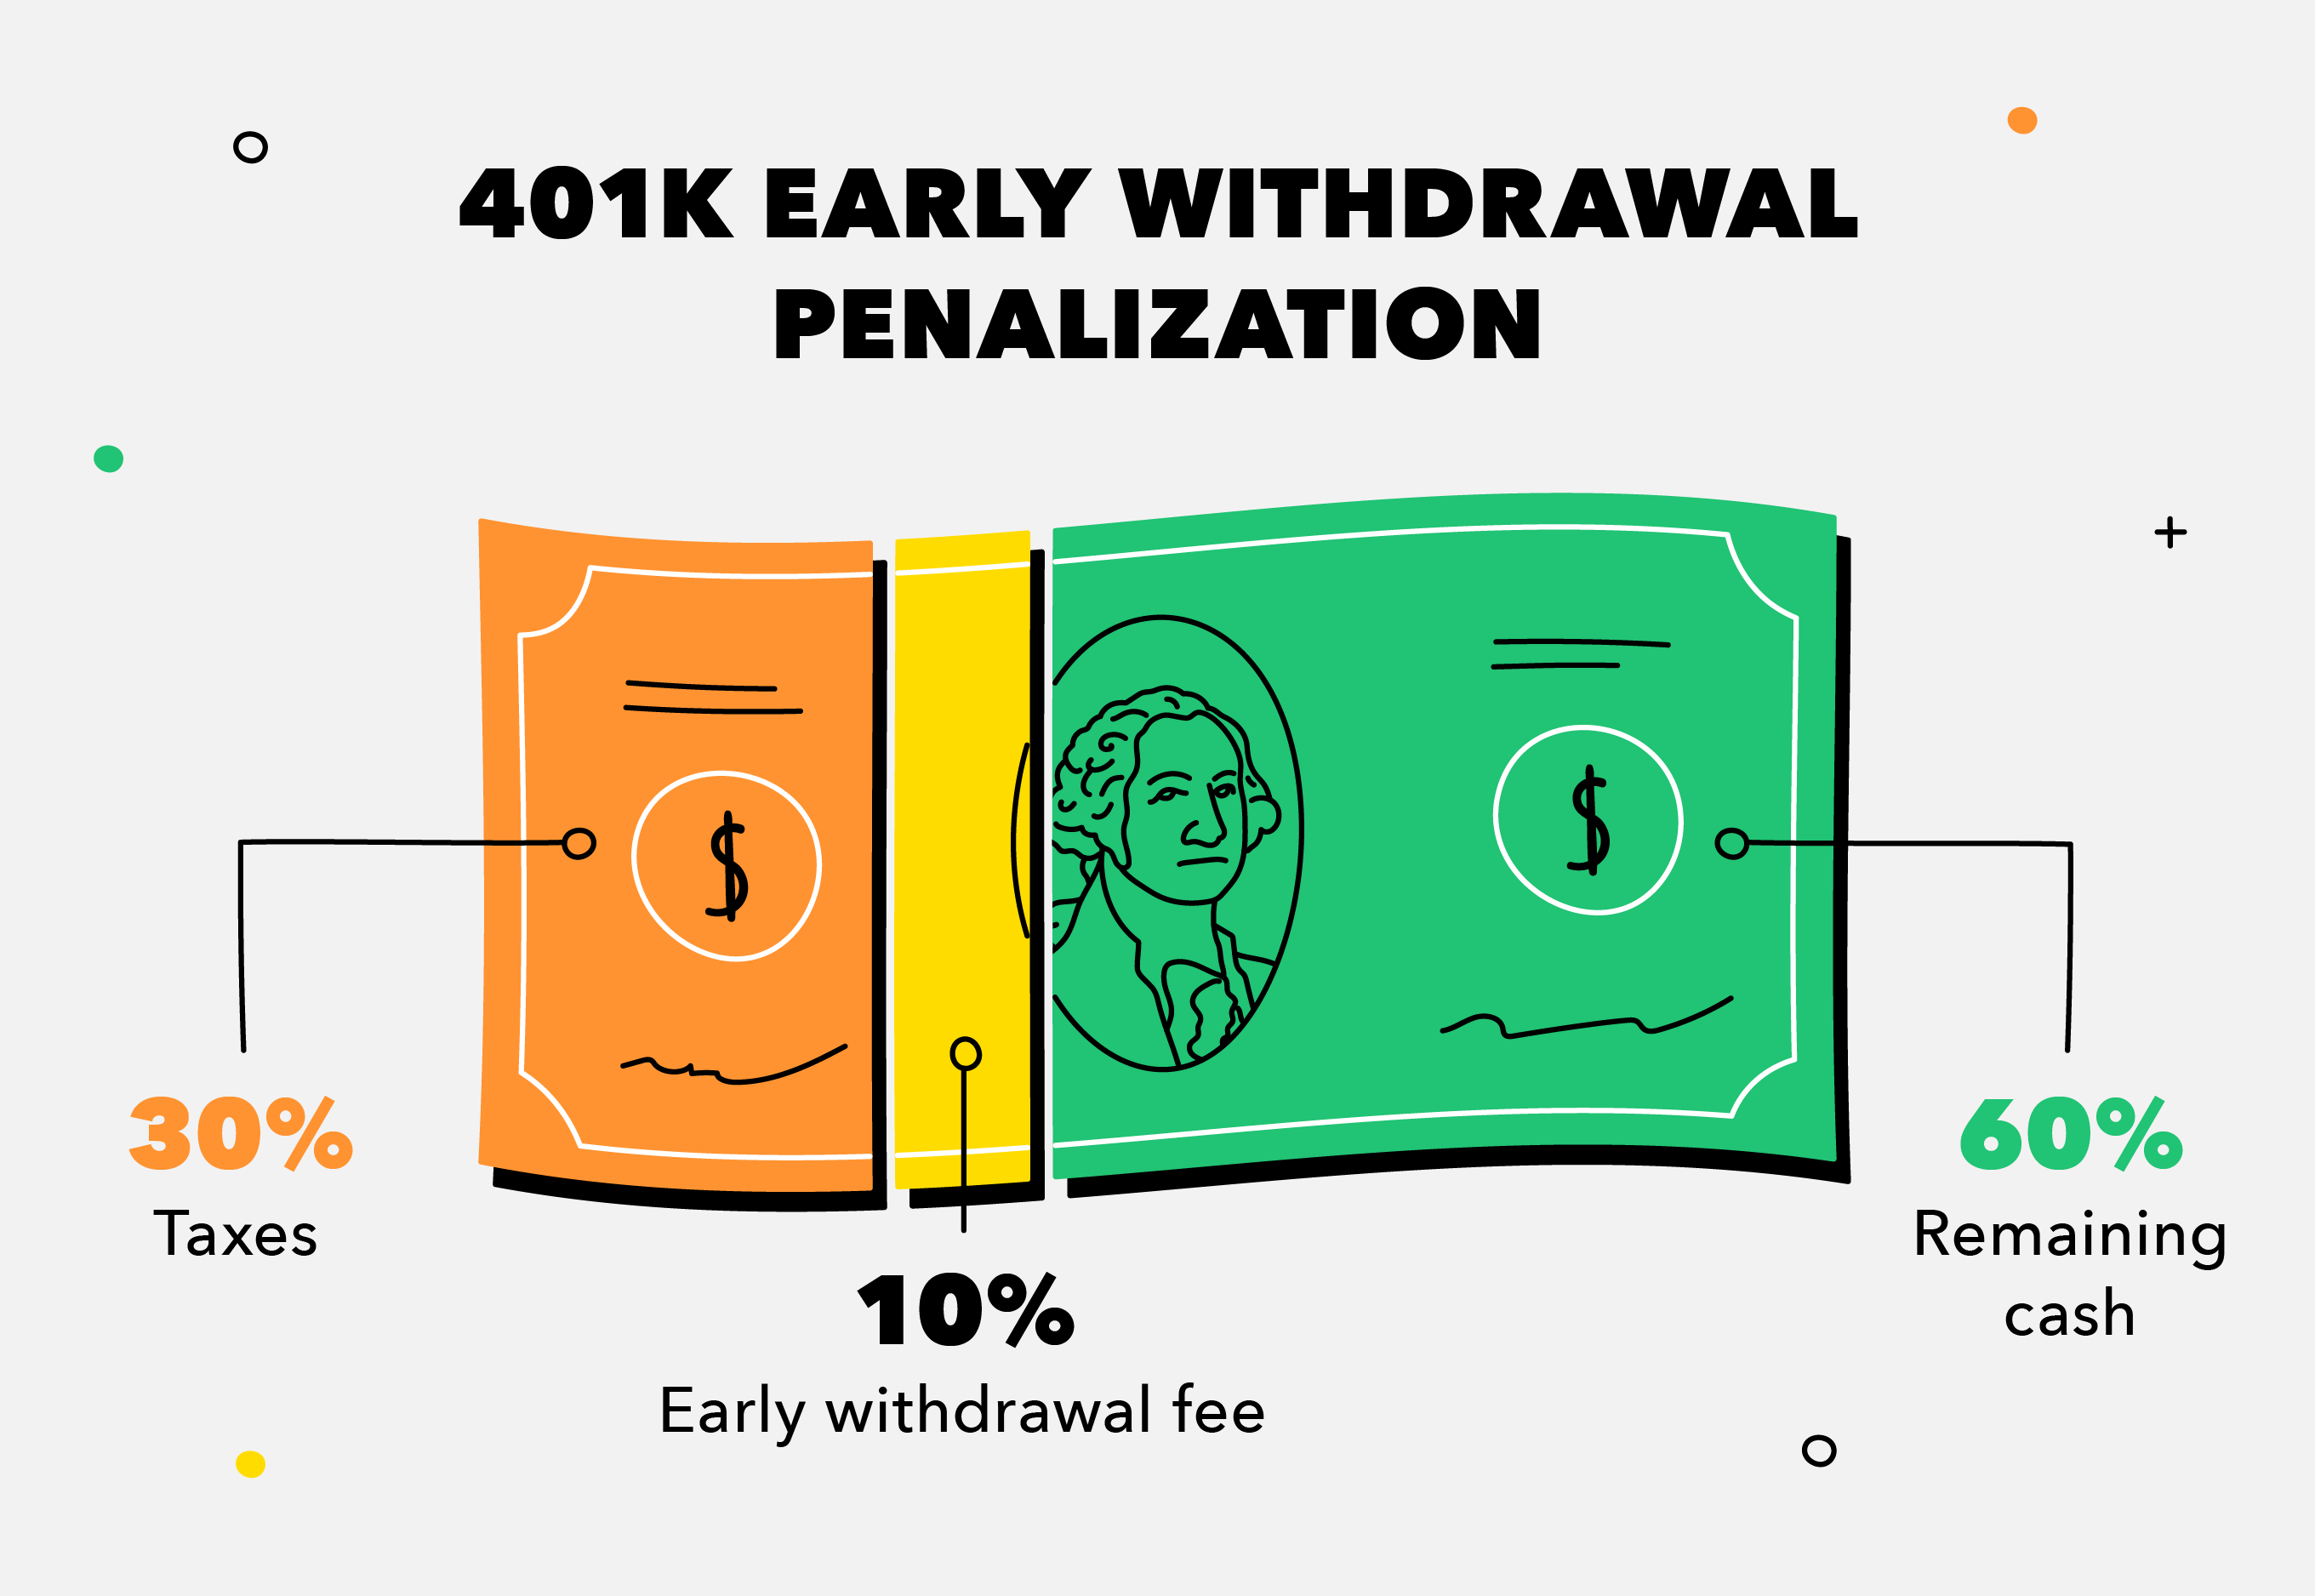 At what age can I withdraw my 401k without being penalized?